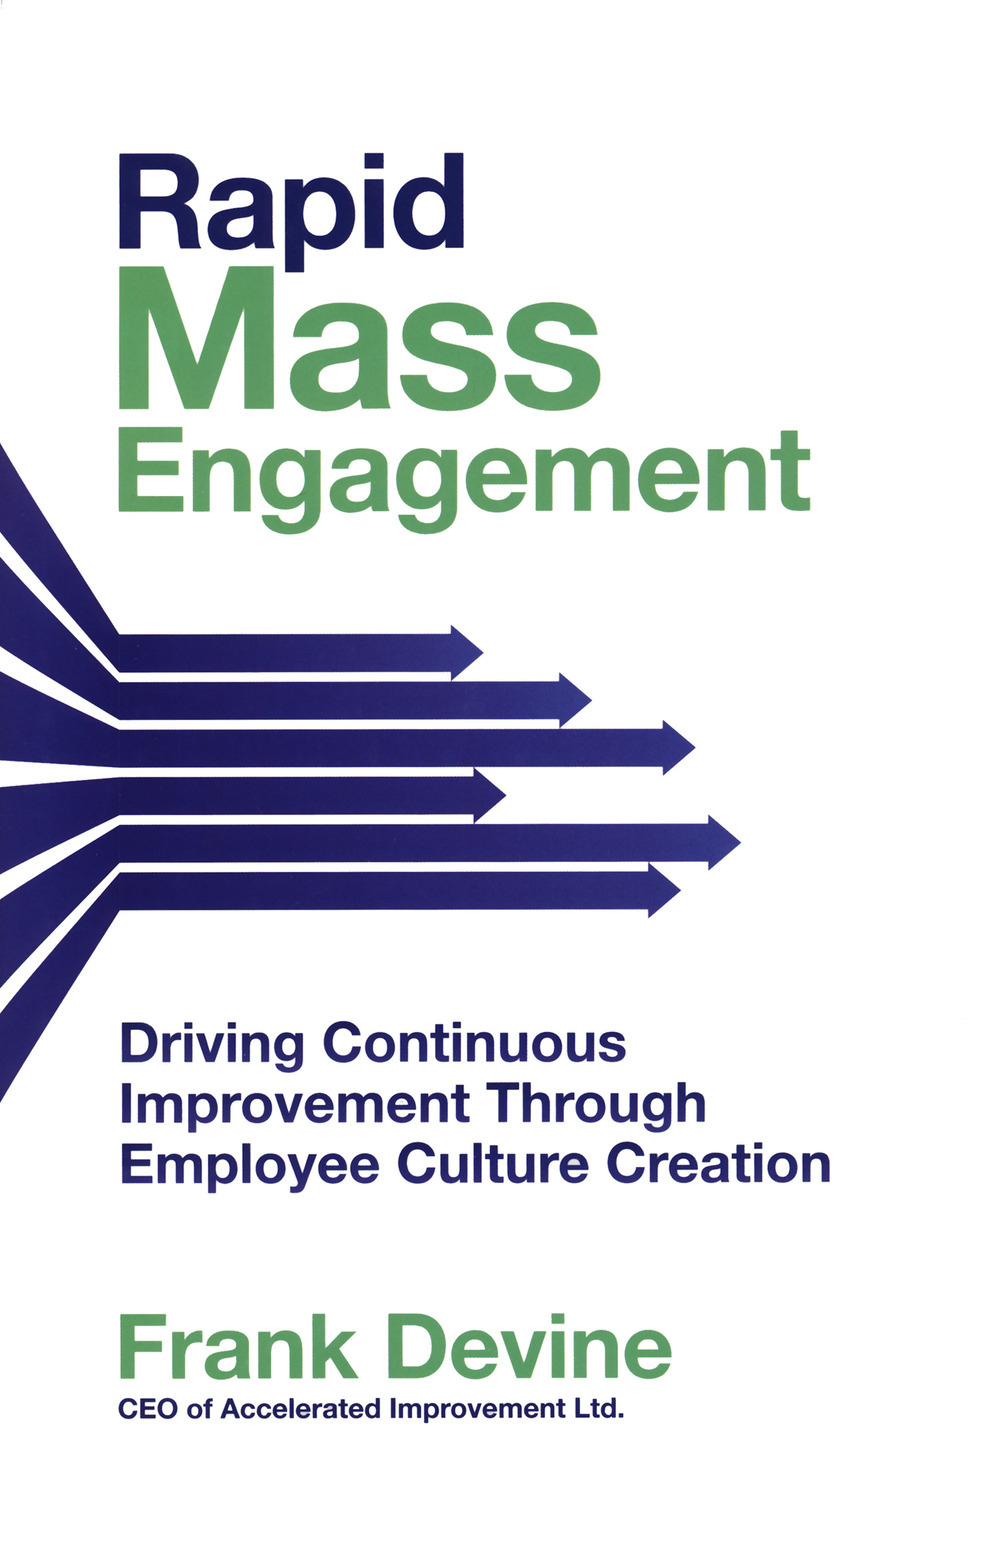 Rapid mass engagement. Driving continuous improvement through employee culture creation